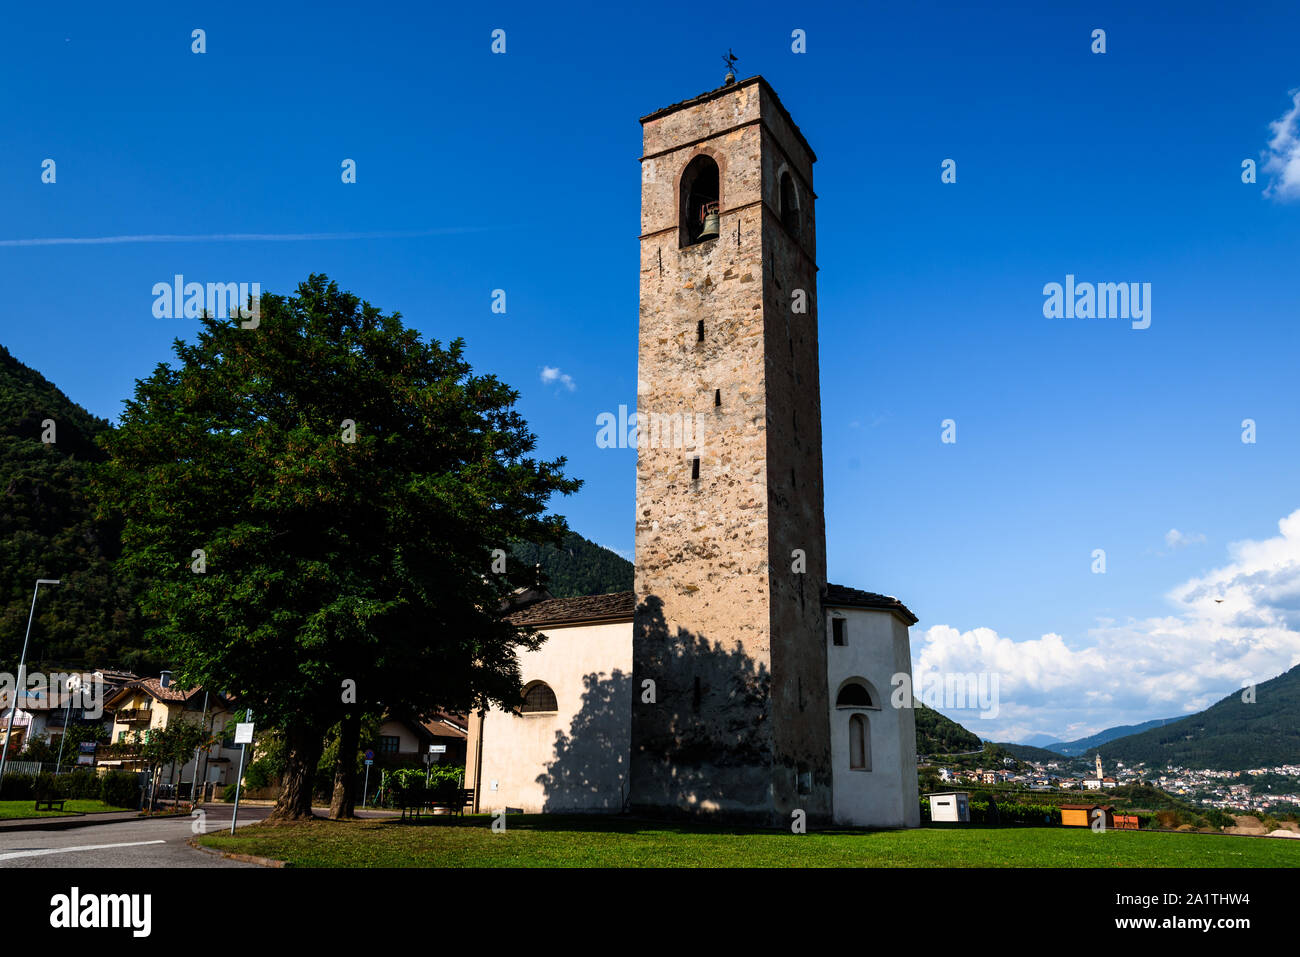 view of the facade of an old church in val di cembra (dolomites) italy Stock Photo